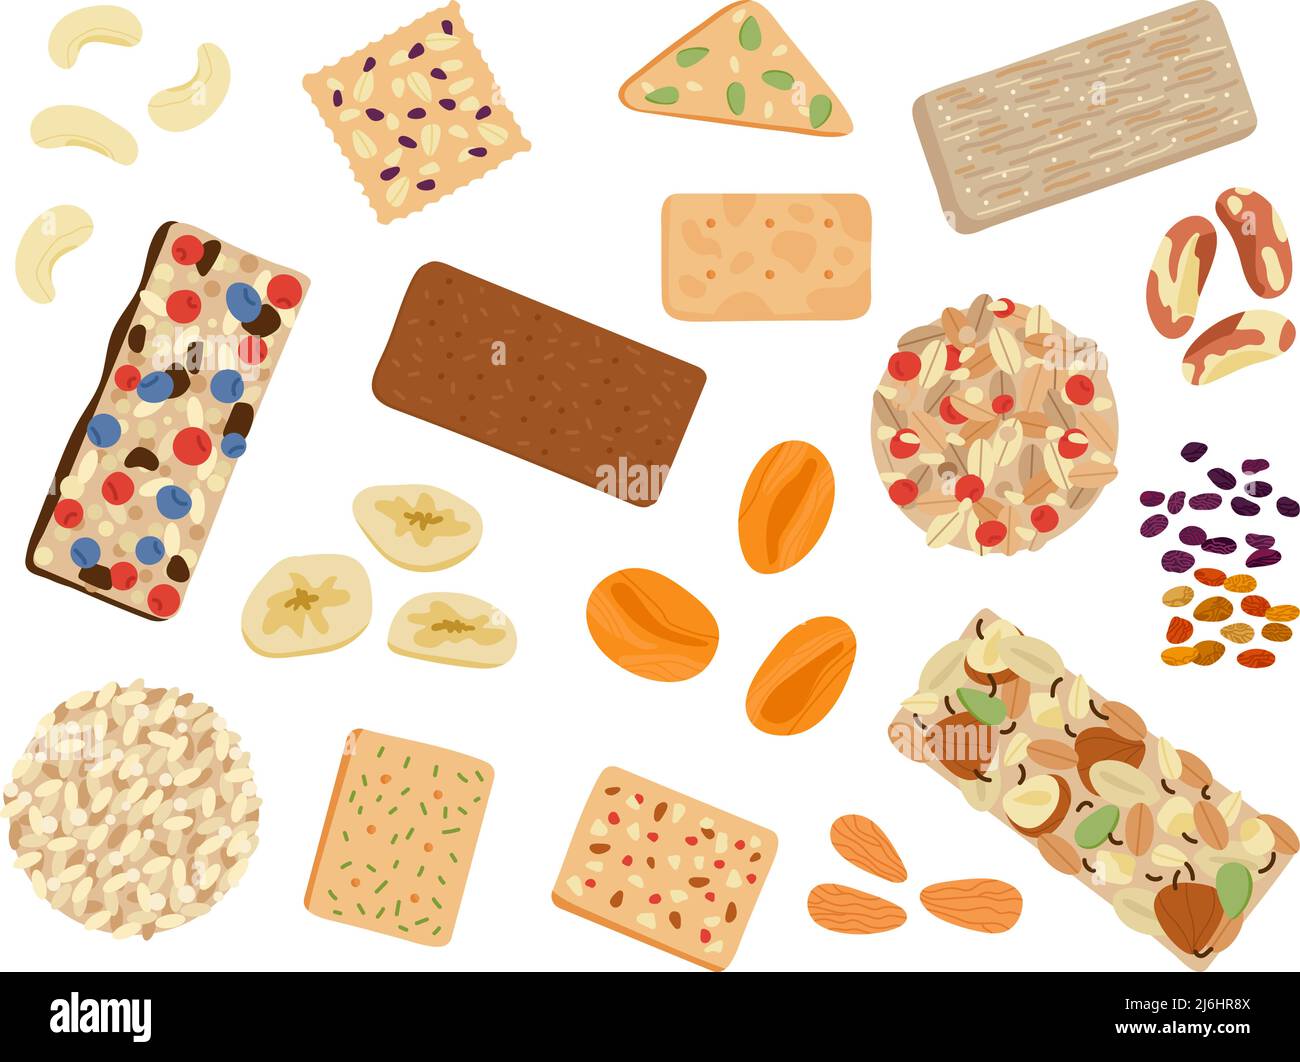 Healthy snacks set. Muesli bars, brazil nuts and seeds. Granola, nut mix and crackers with herbs. Isolated vegan kit fast food decent vector Stock Vector